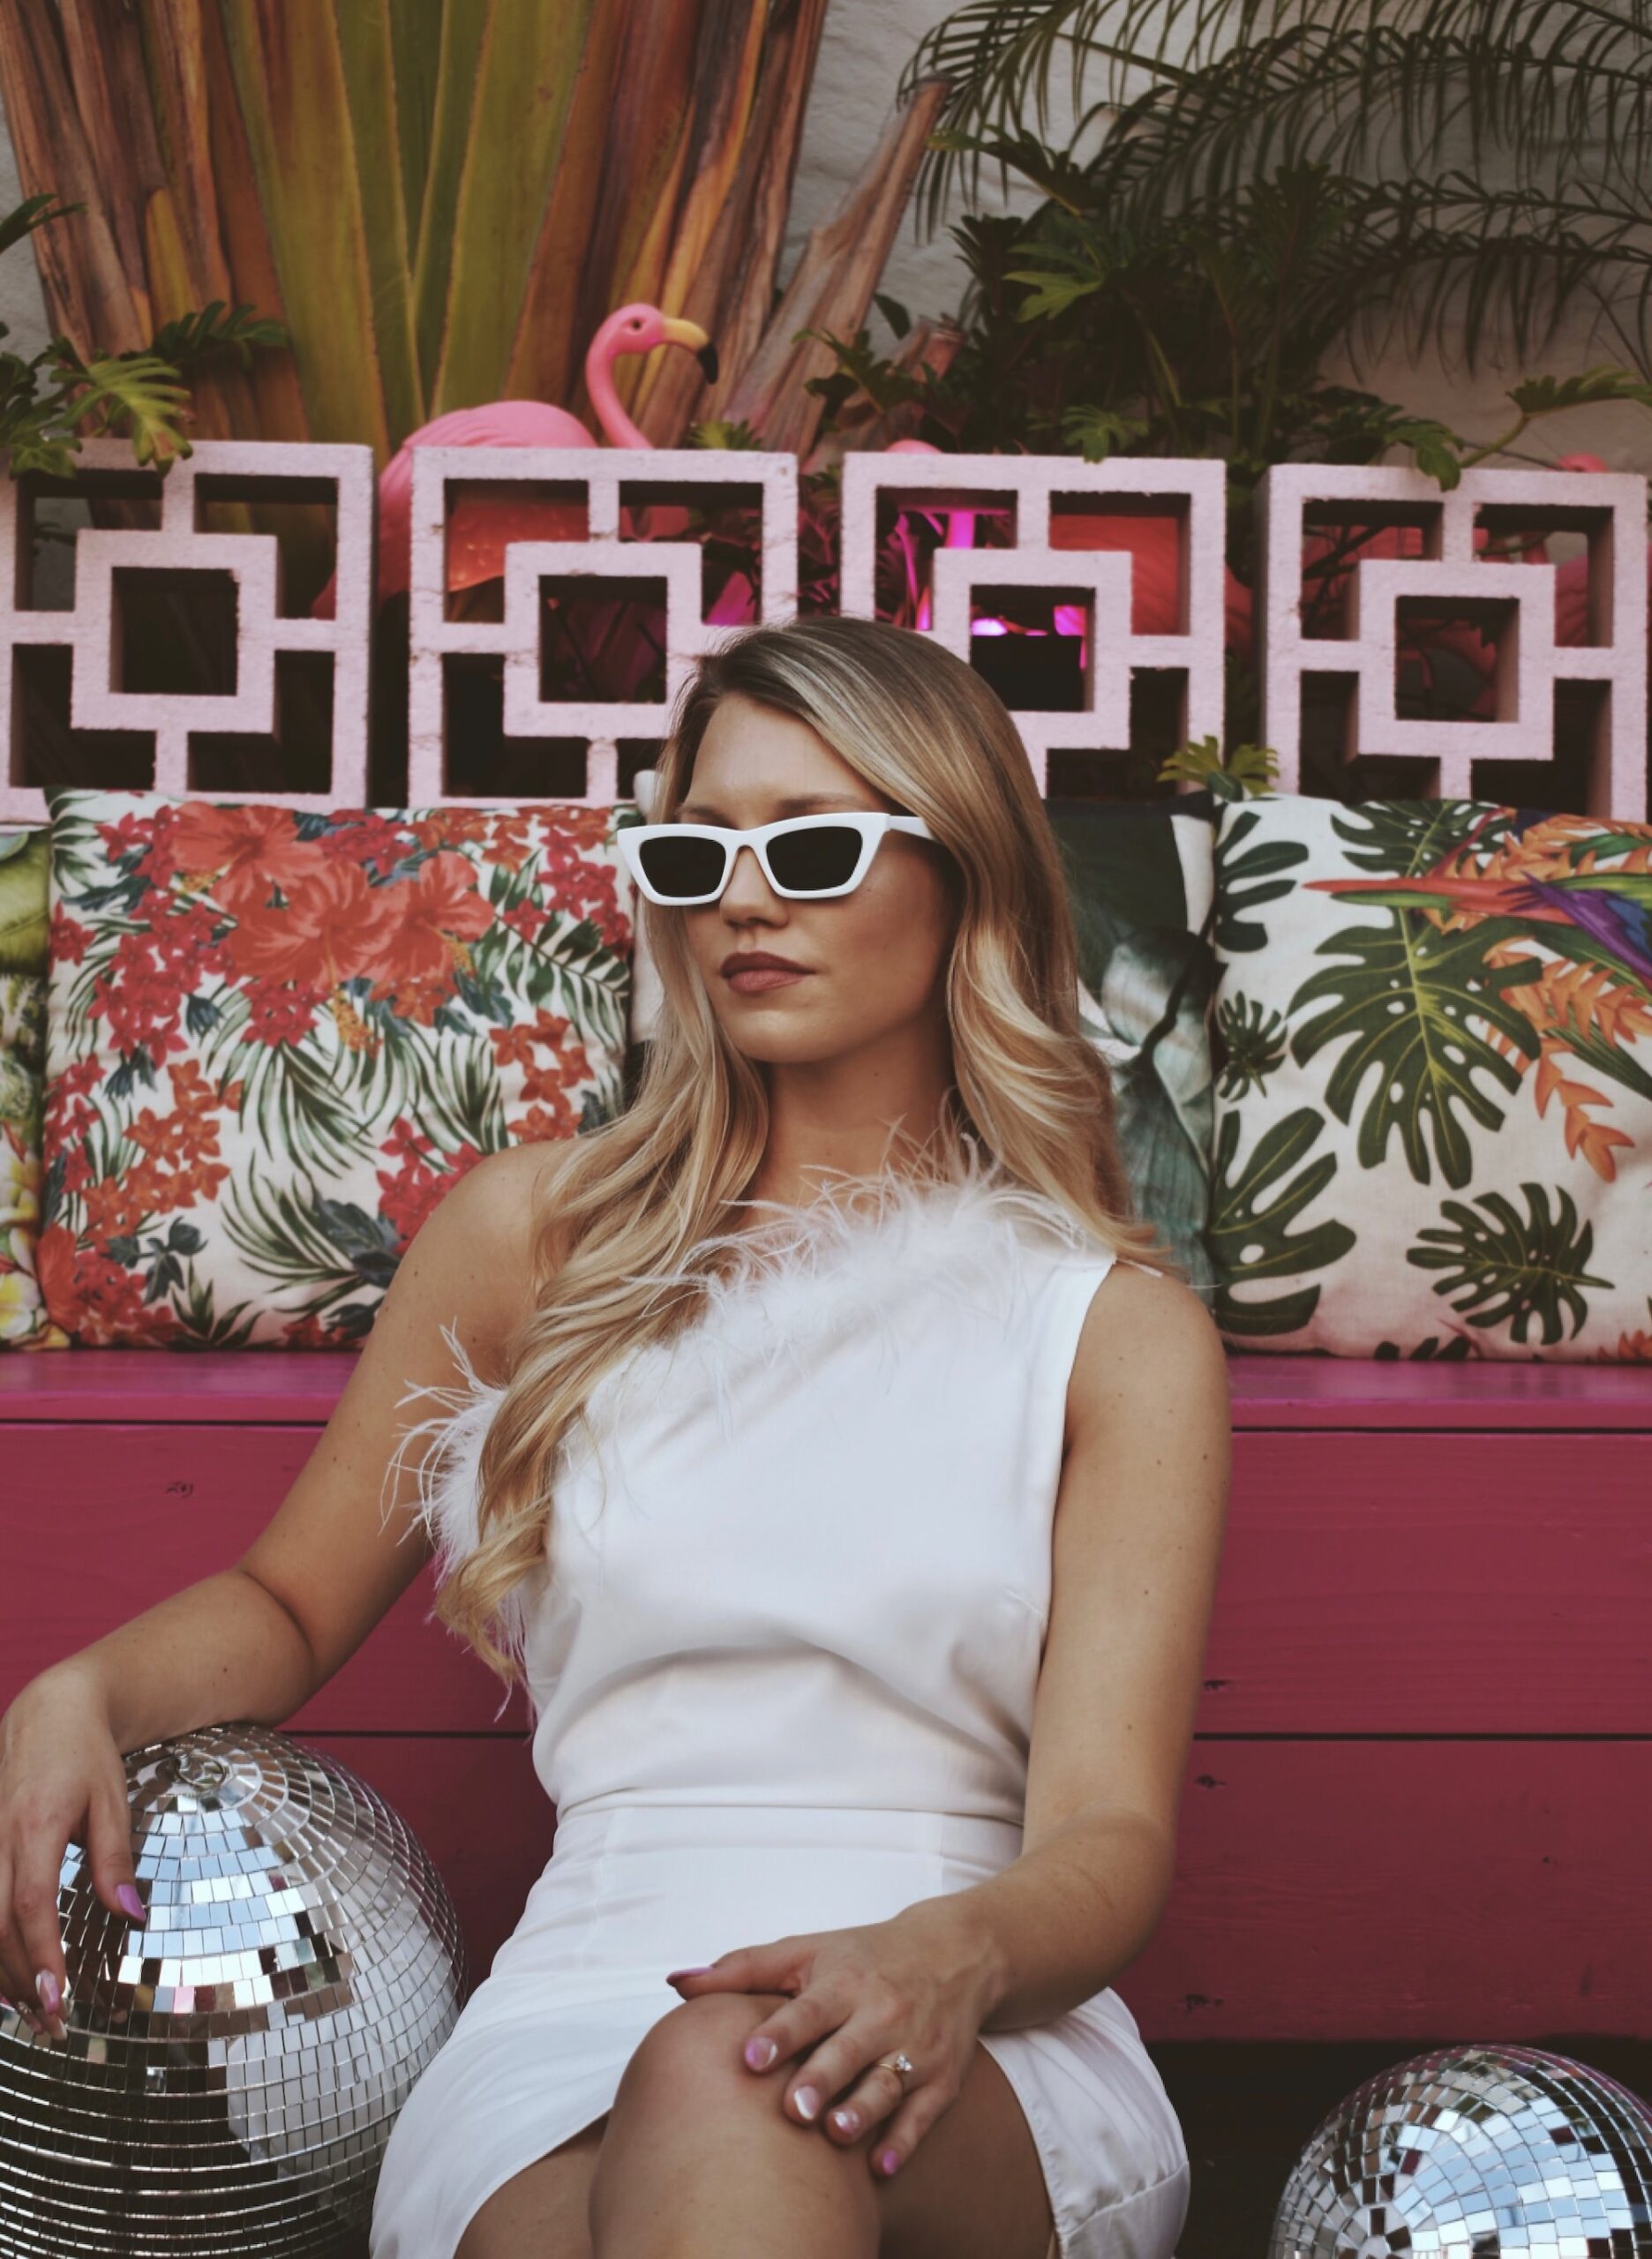 Bride in White Sunglasses Holding Disco Ball at Bar in St. Petersburg Florida for Bachelorette Party | Photographer The Gadabout Captures